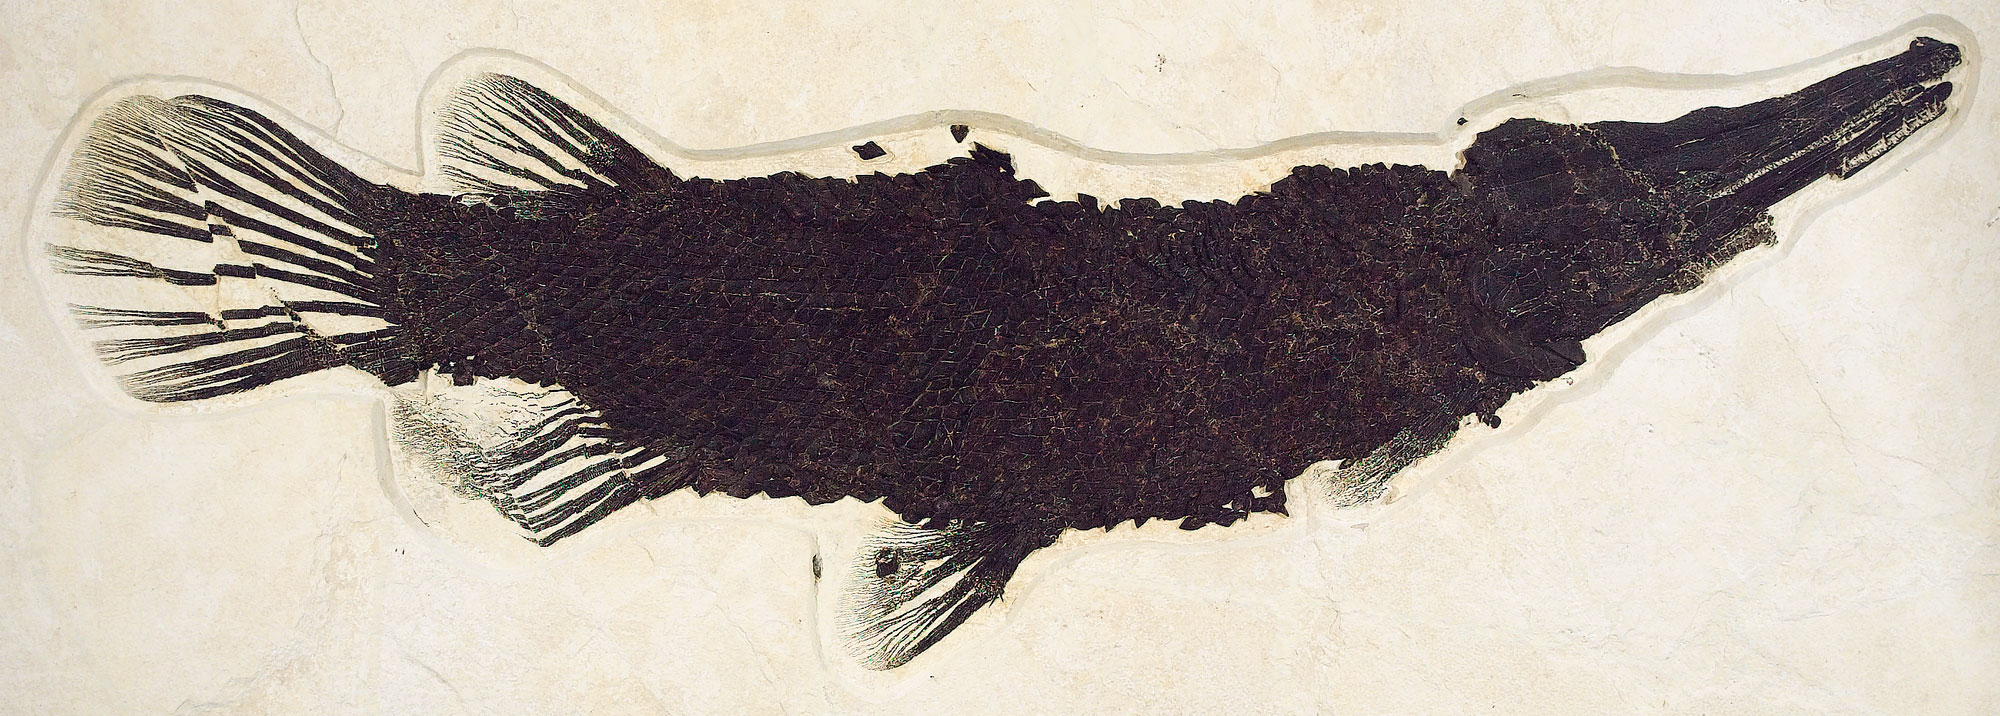 Photograph of a fossil gar (a type of fish) from Fossil Lake, Wyoming. The gar is nearly complete and is preserved covered with large scales. The head is pointed to the right and the tail to the left. The fish is preserved in off-white stone.